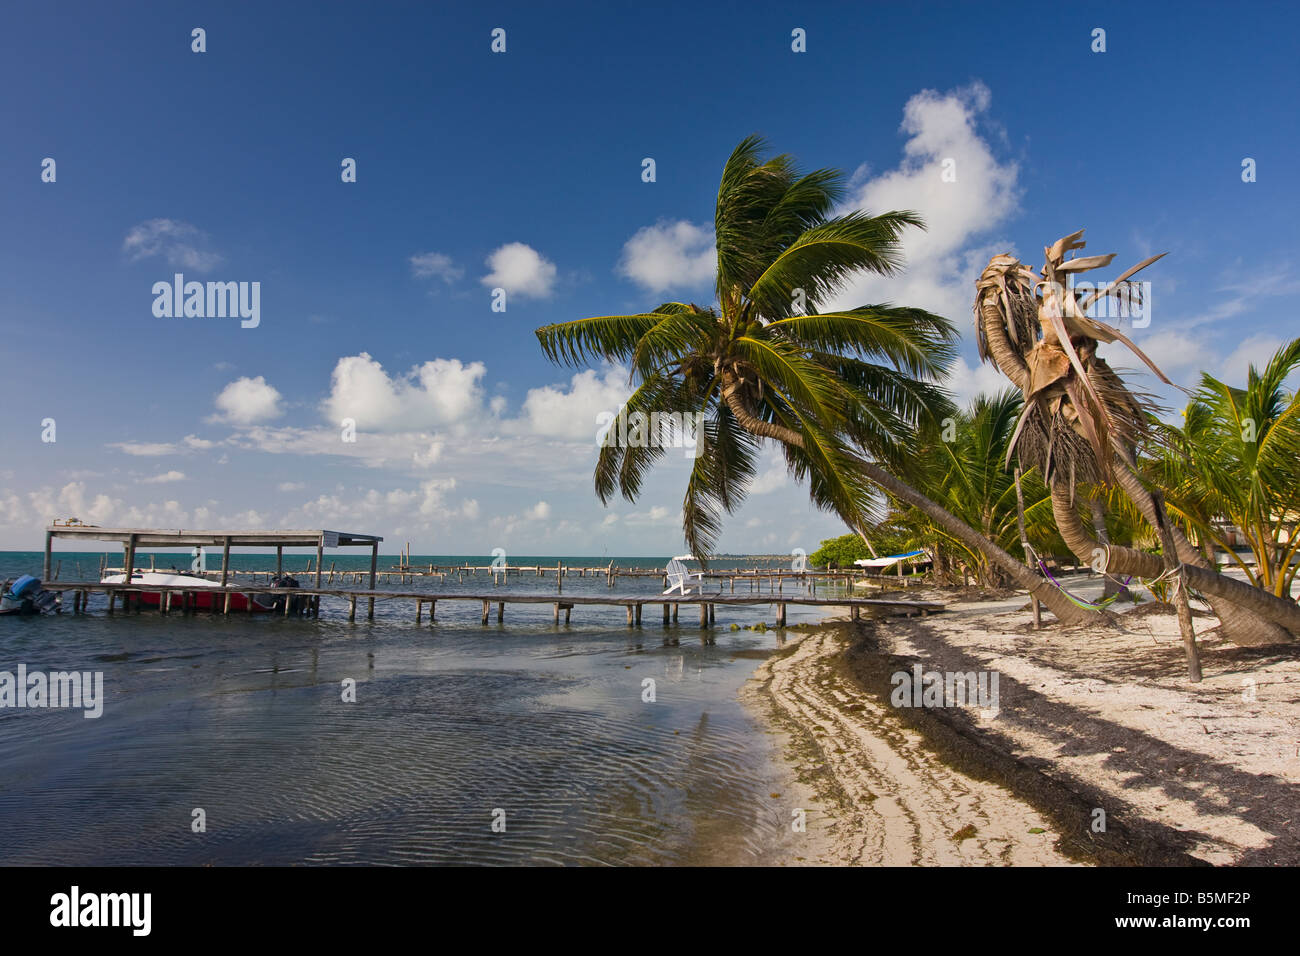 CAYE CAULKER BELIZE - Wooden dock and palm trees on beach Stock Photo